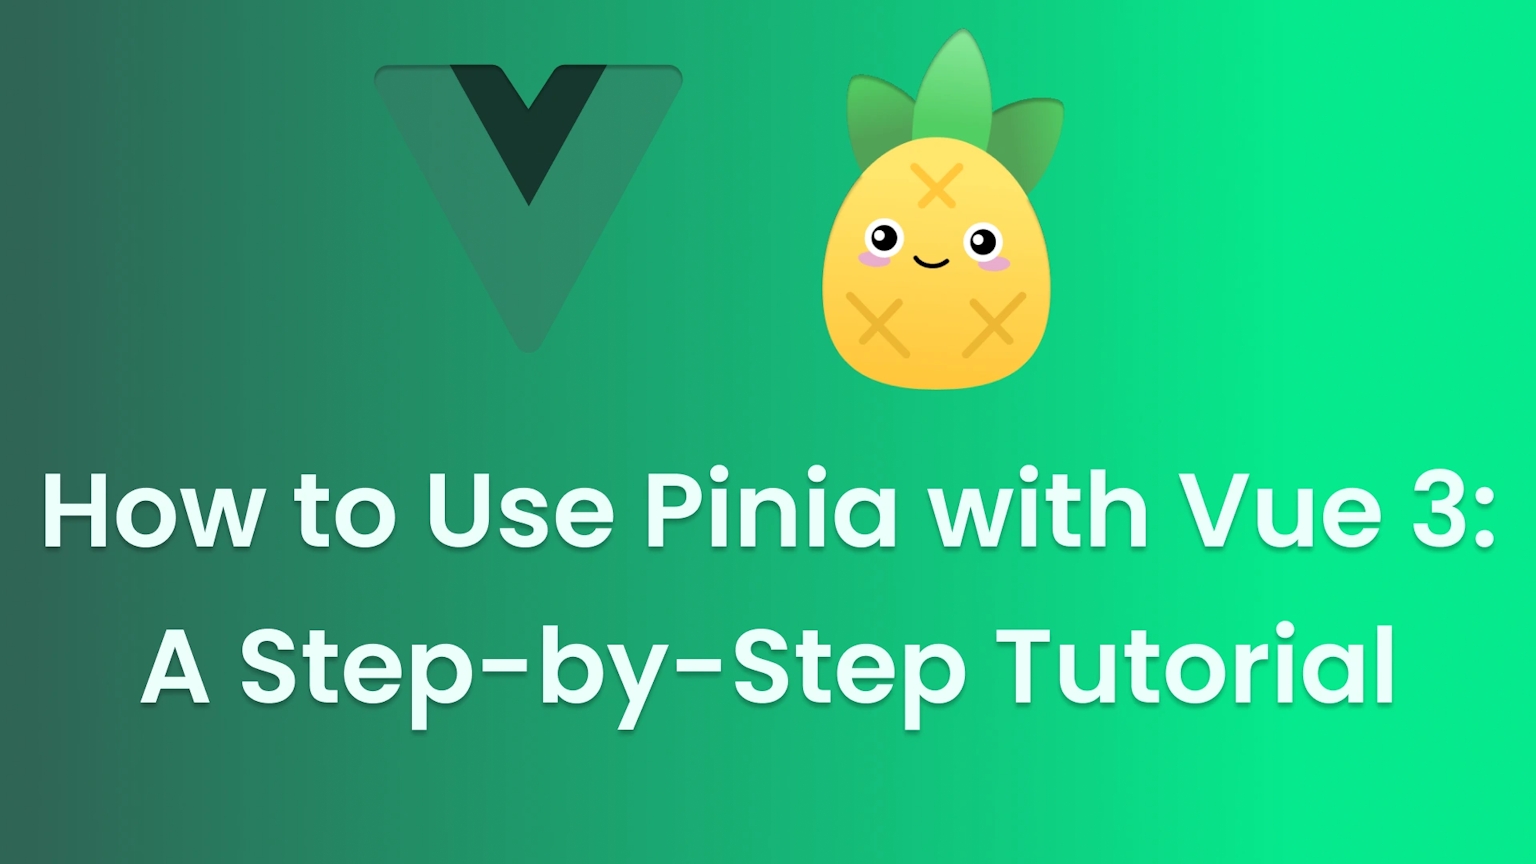 How to Use Pinia with Vue 3: A Step-by-Step Tutorial